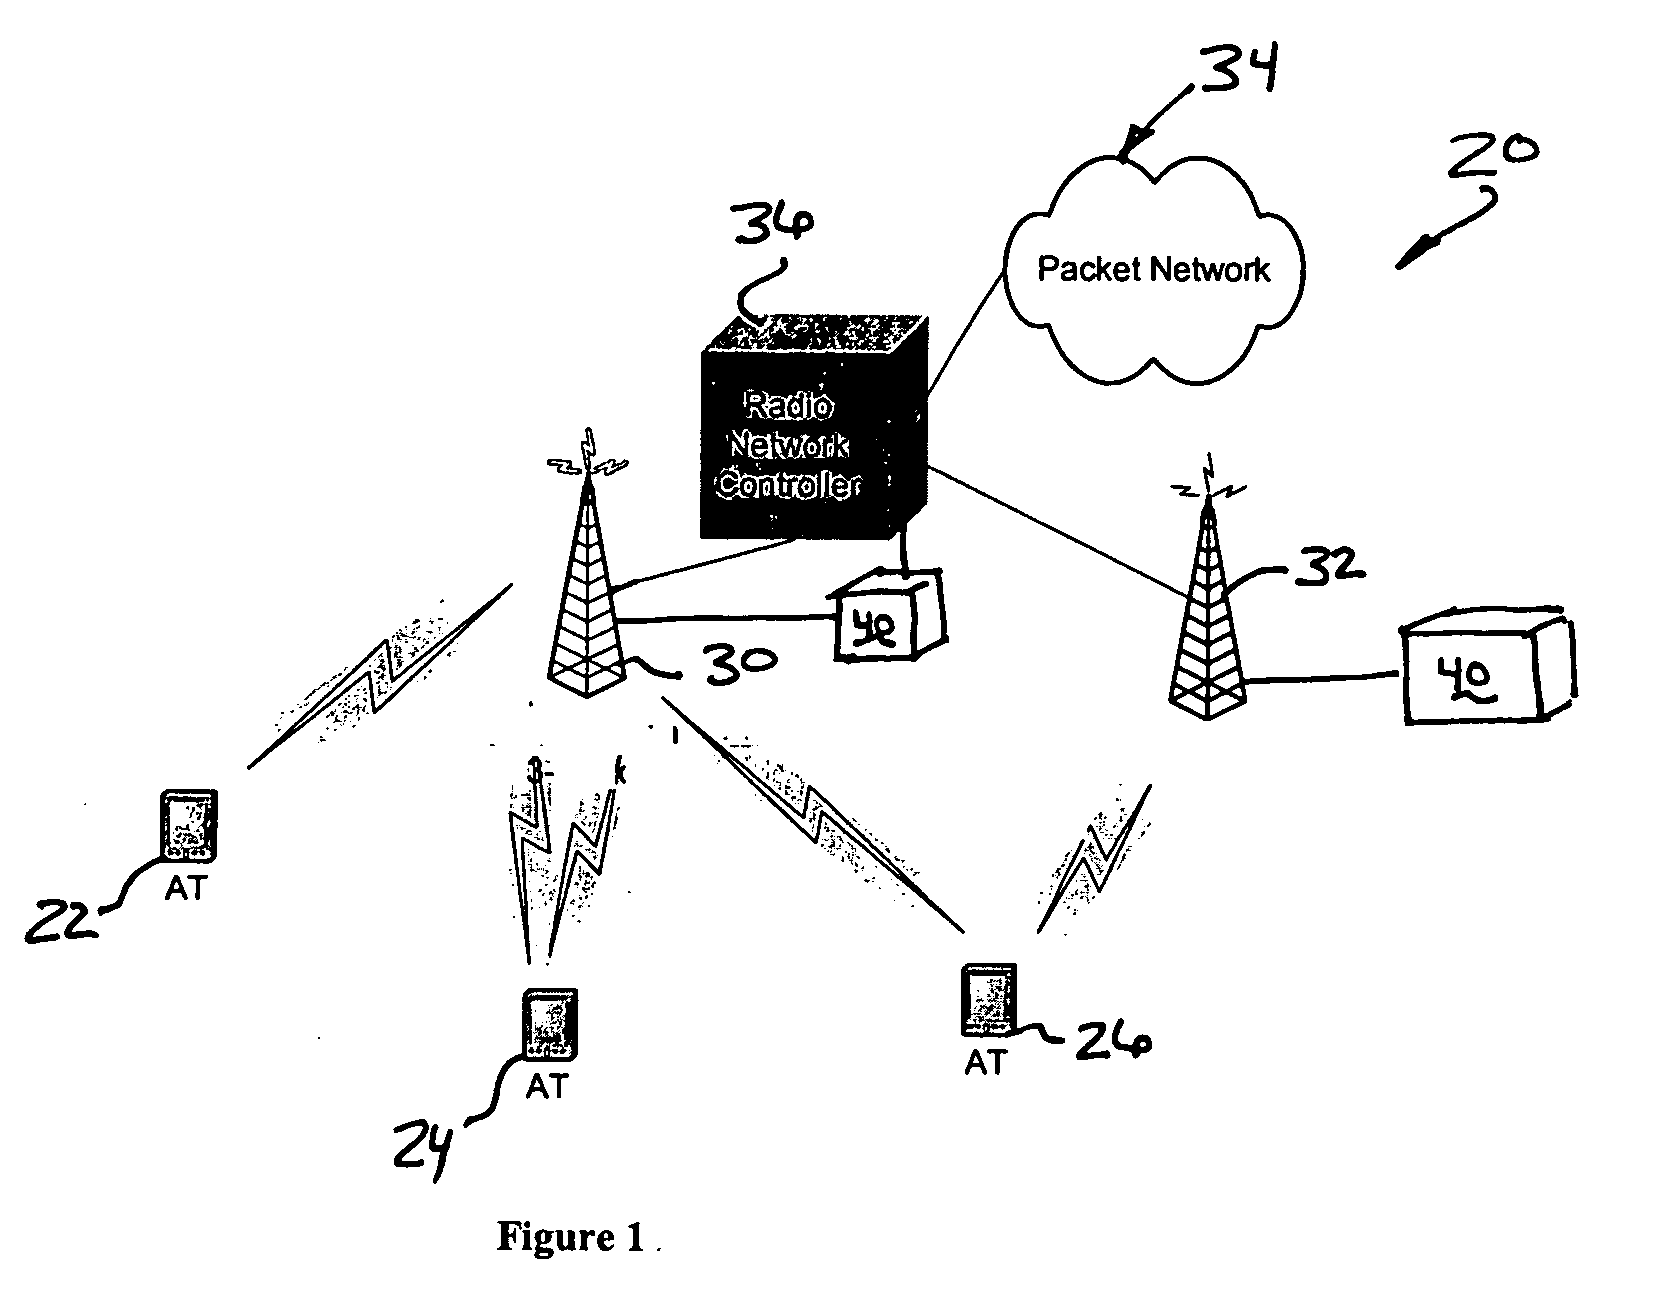 Flow-based call admission control for wireless communication systems